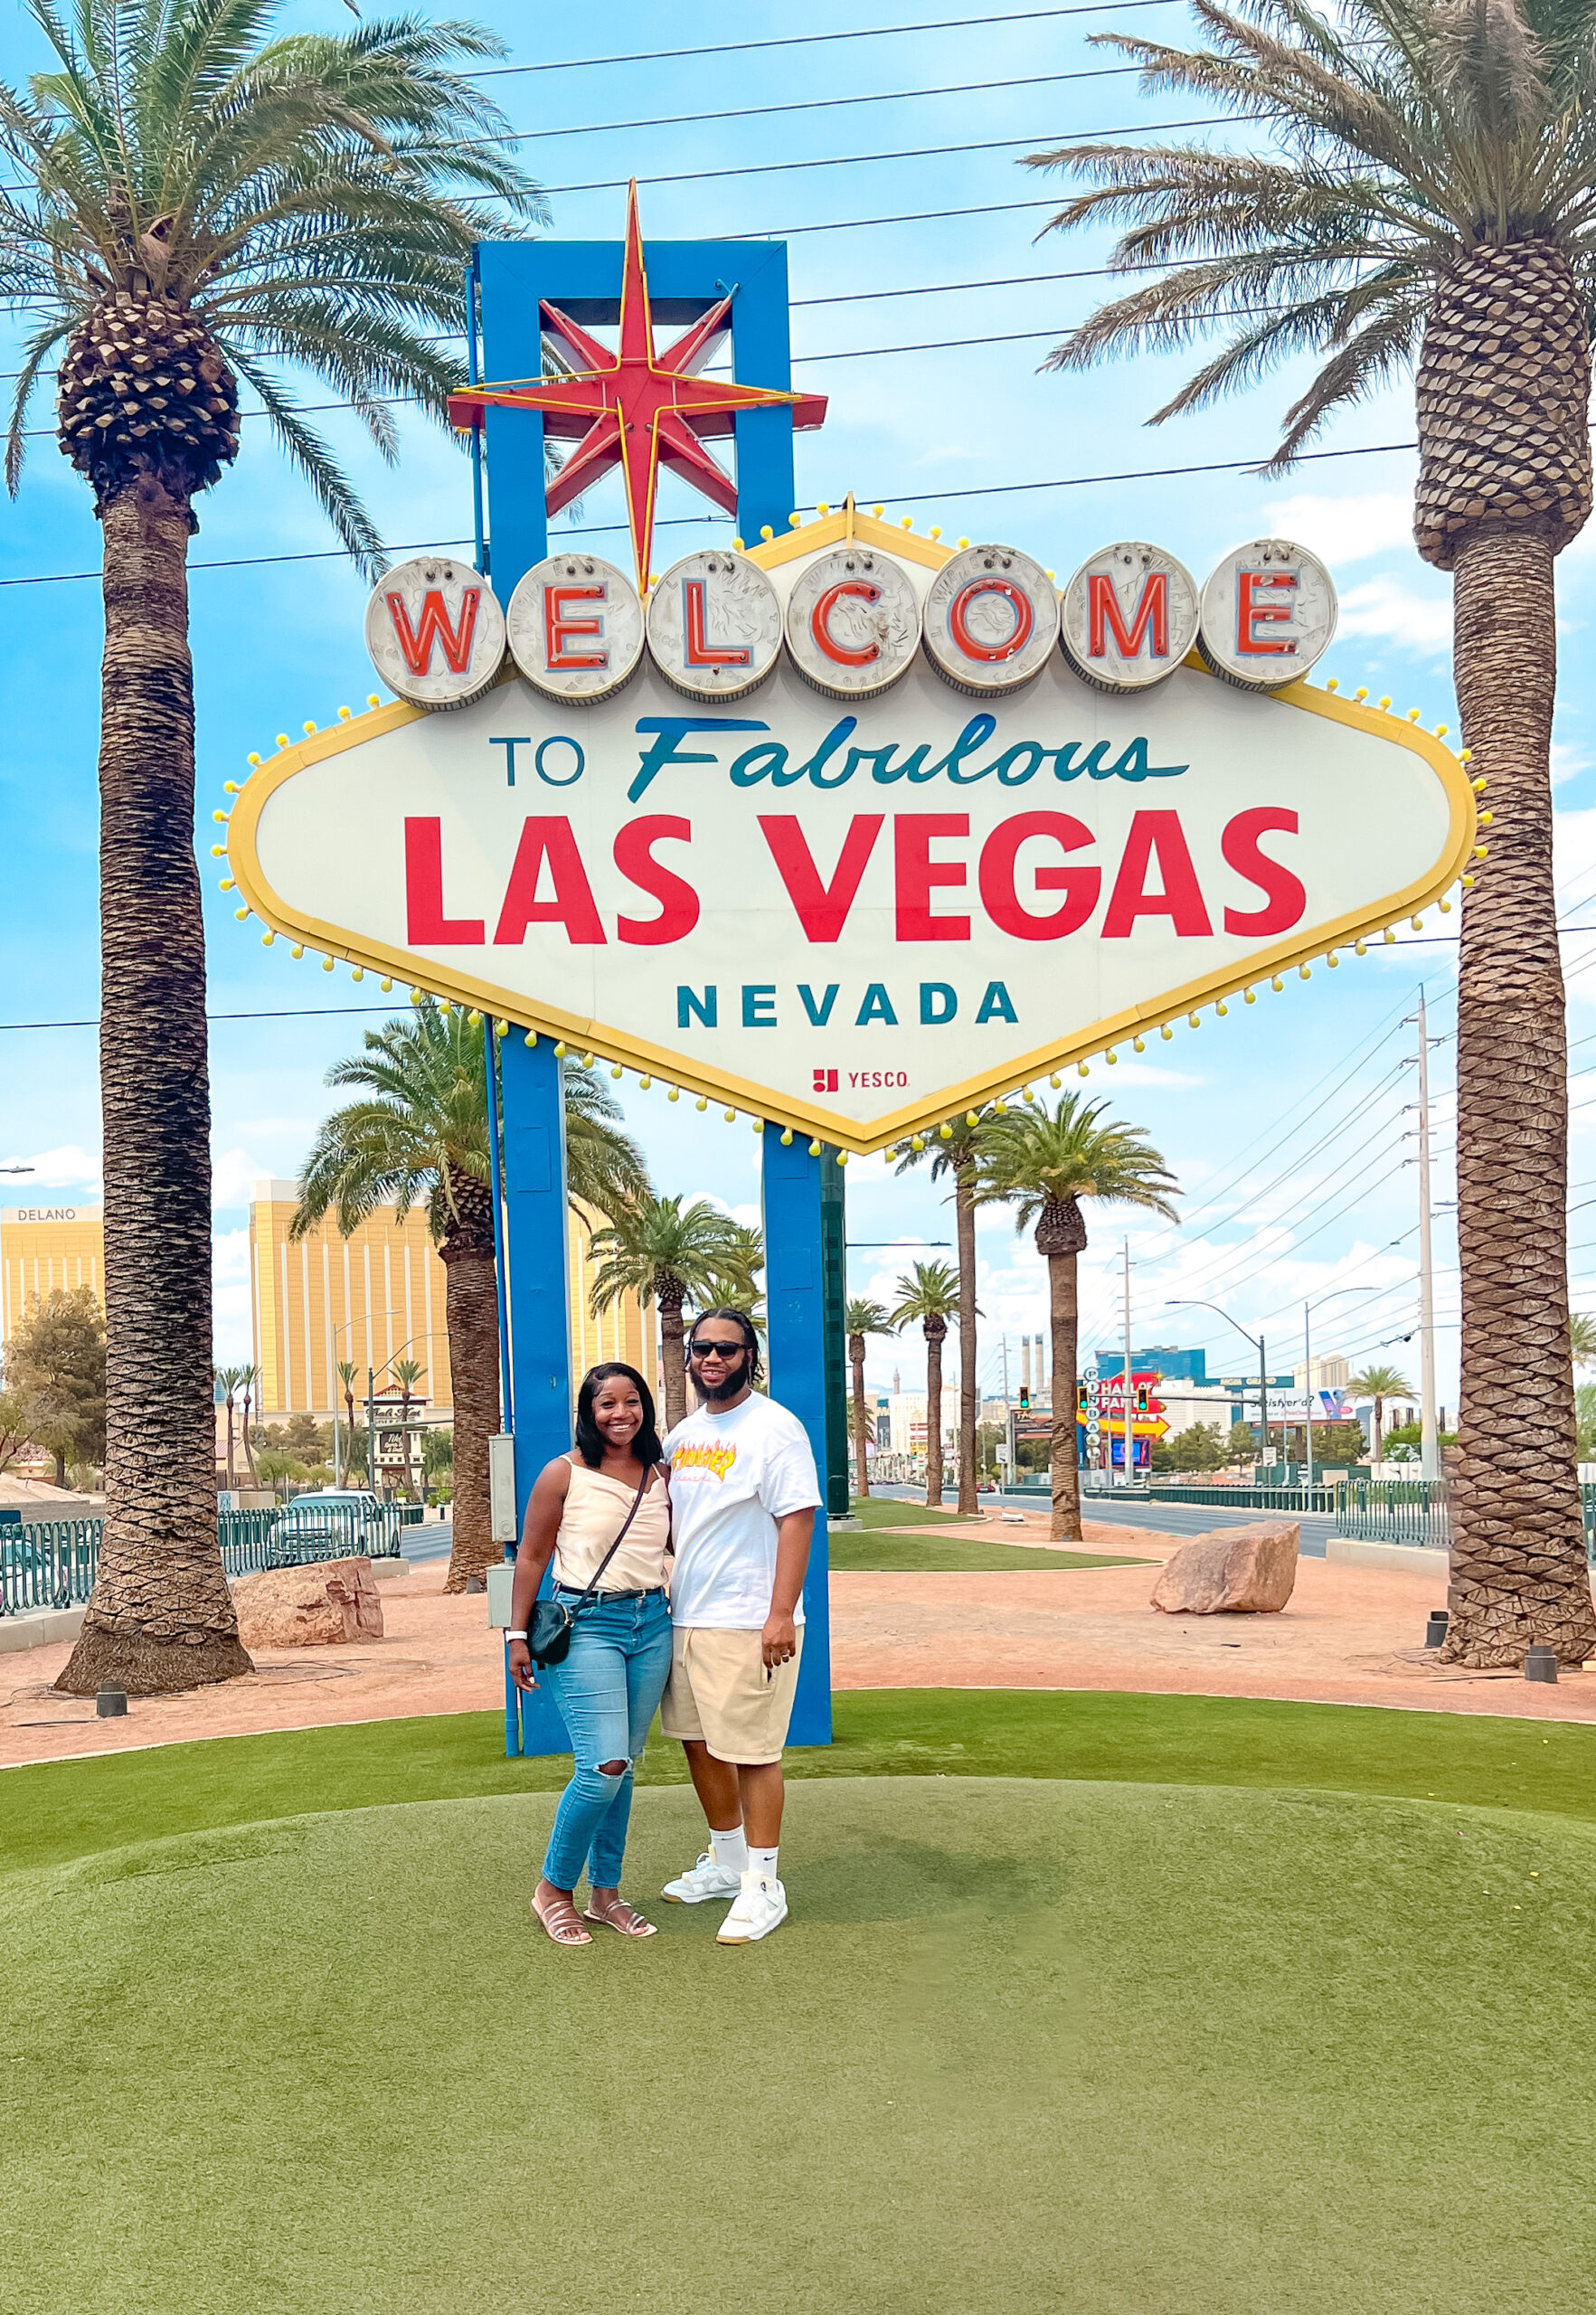 3 Activities To Celebrate Your Anniversary in Vegas